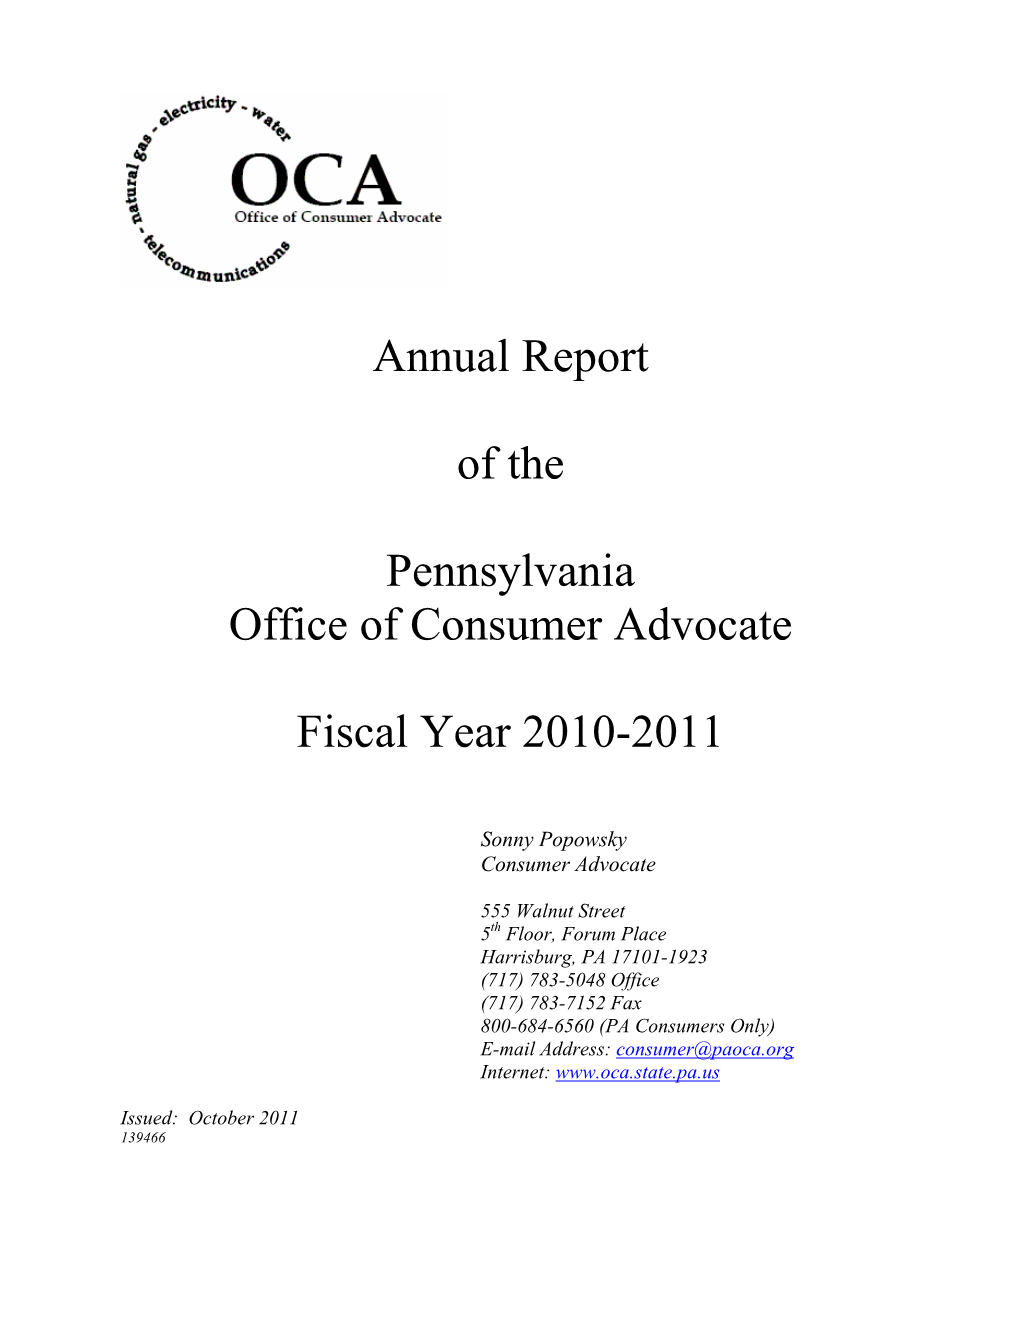 Annual Report of the Pennsylvania Office of Consumer Advocate Fiscal